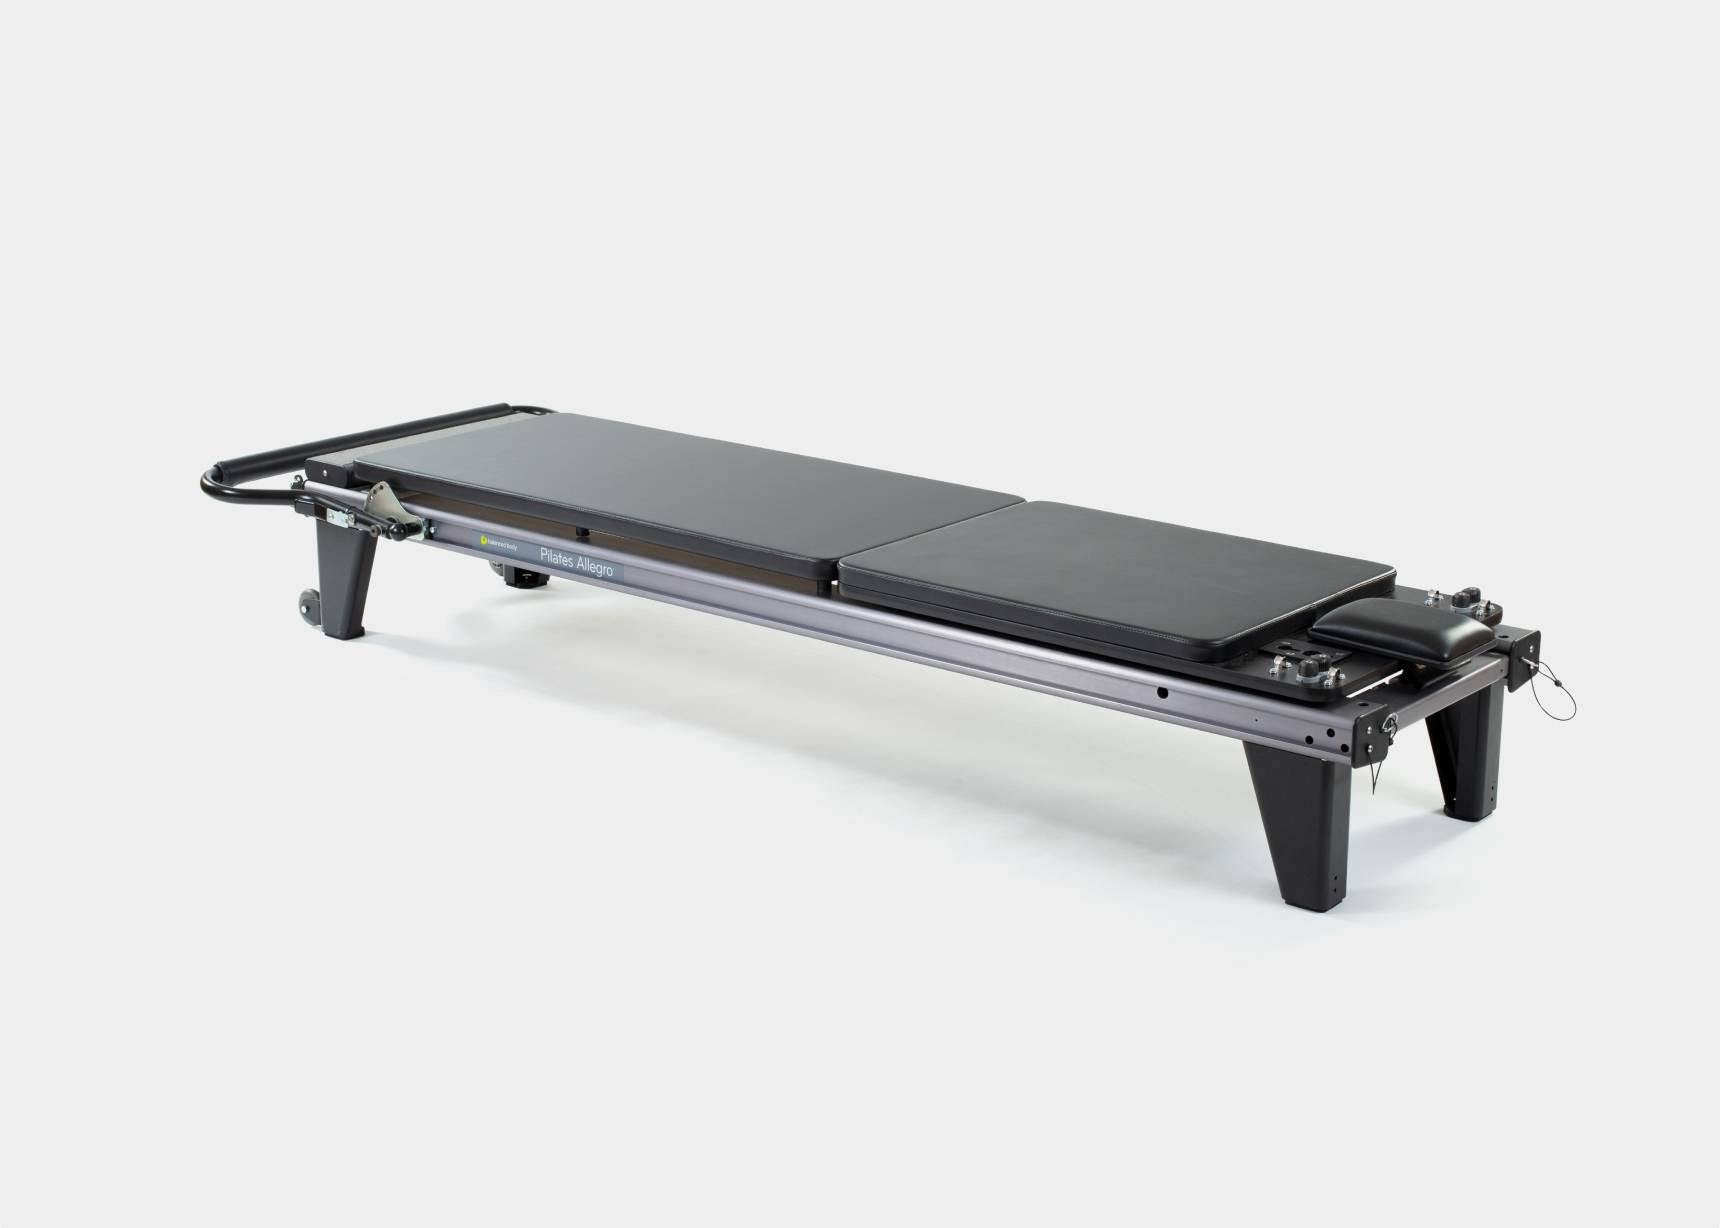 Allegro® 2 Reformer with Tower and Mat